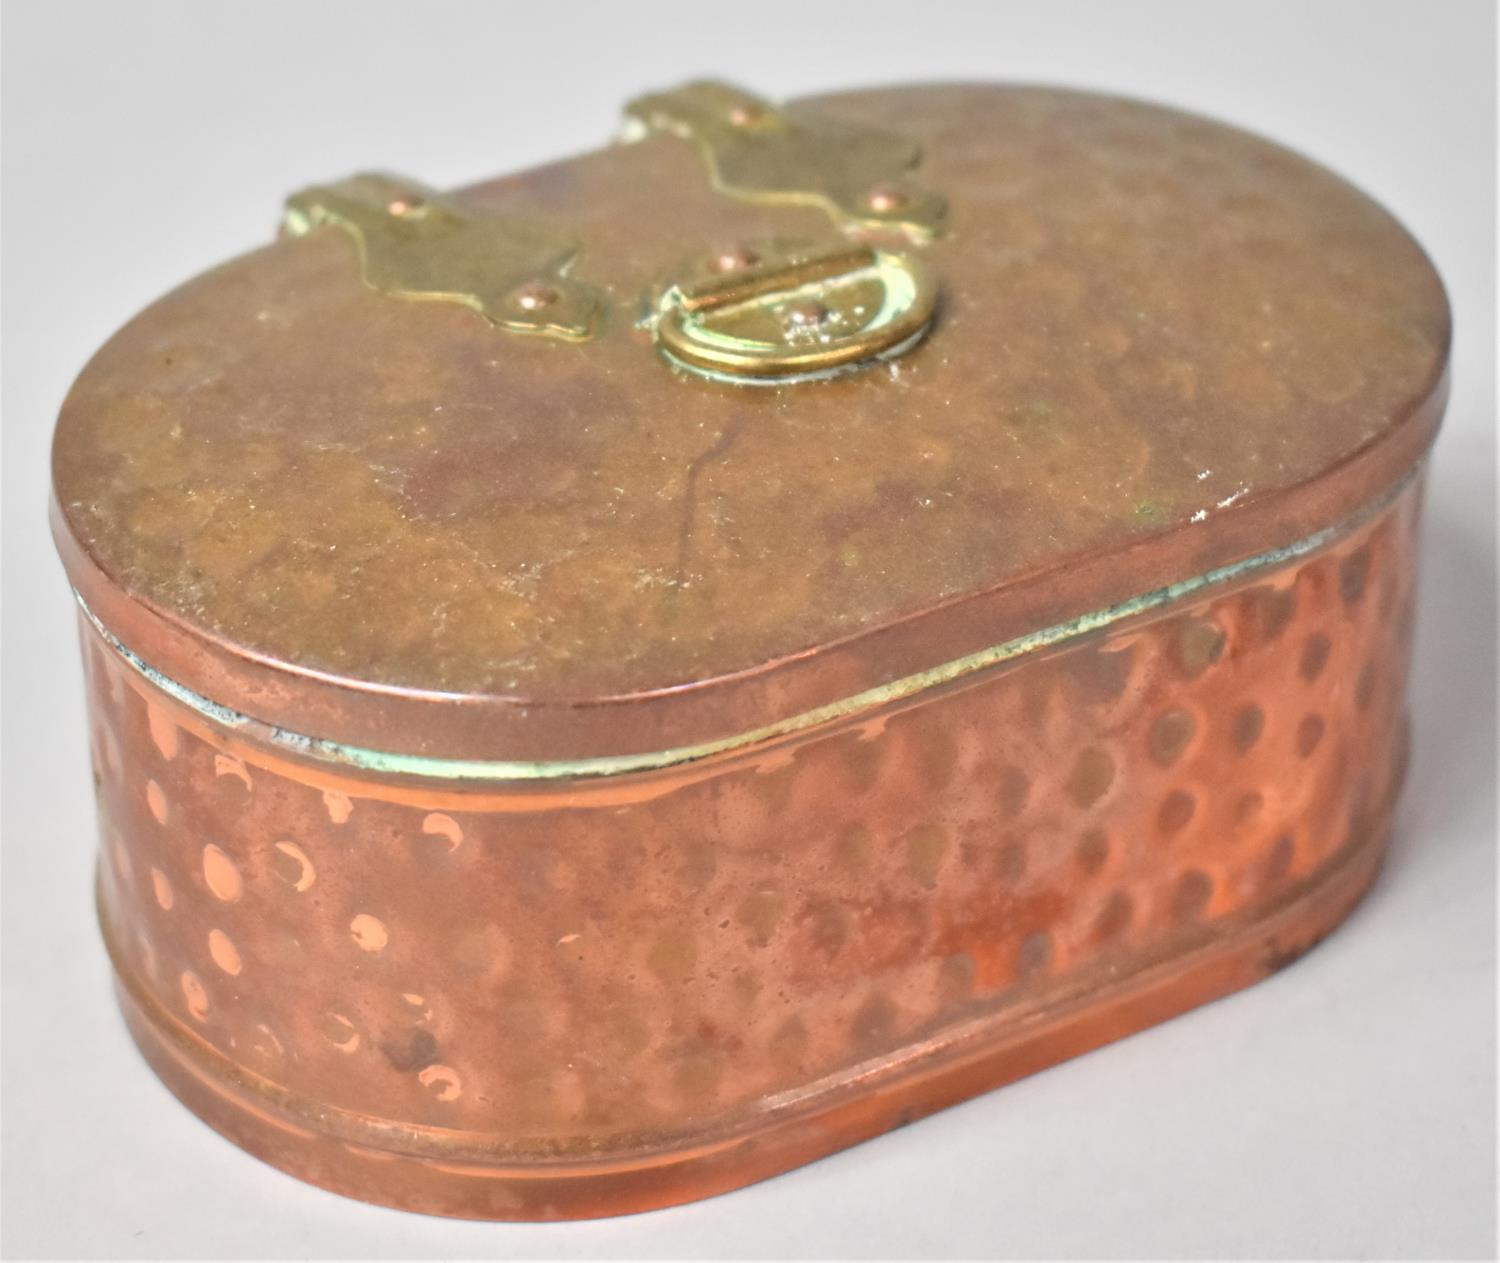 A Copper Oval Box with Brass Hinges and Handle, 11.5cm Long